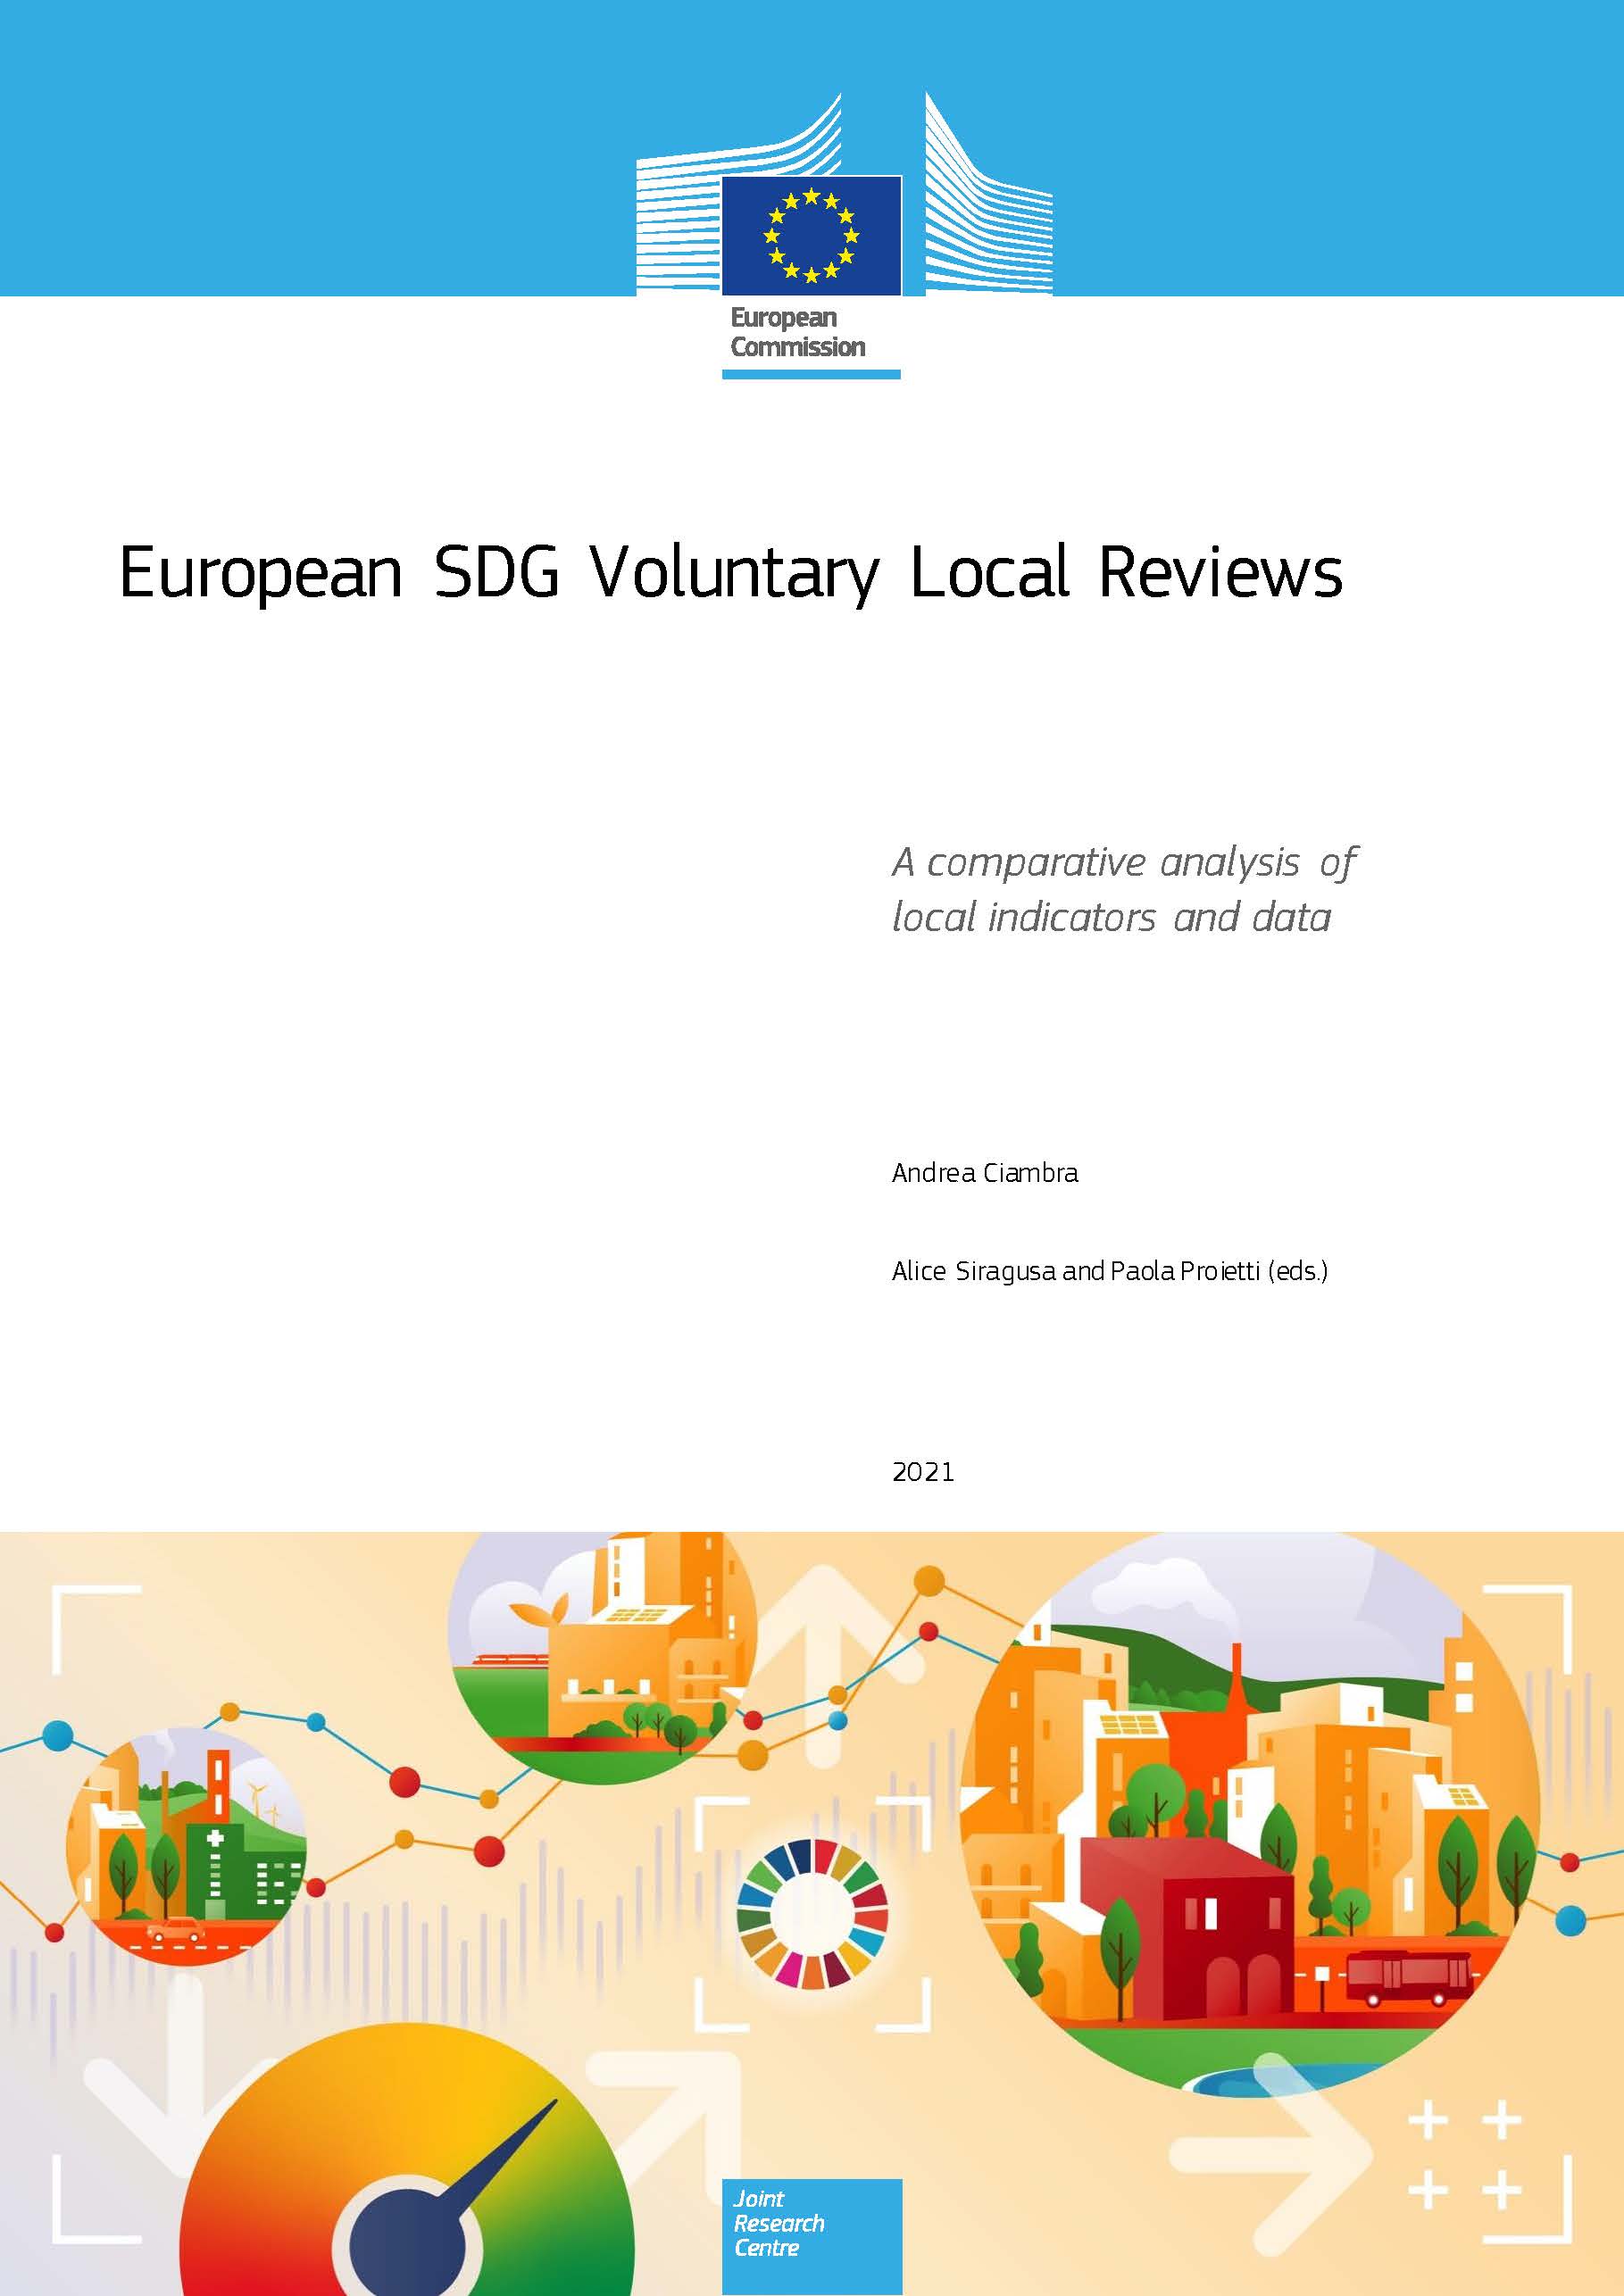 Titel: Ciambra, A., European SDG Voluntary Local Reviews: A comparative analysis of local indicators and data, Siragusa, A., Proietti, P. (eds), Publications Office EU, Luxembourg, 2021, doi:10.2760/9692, JRC124580